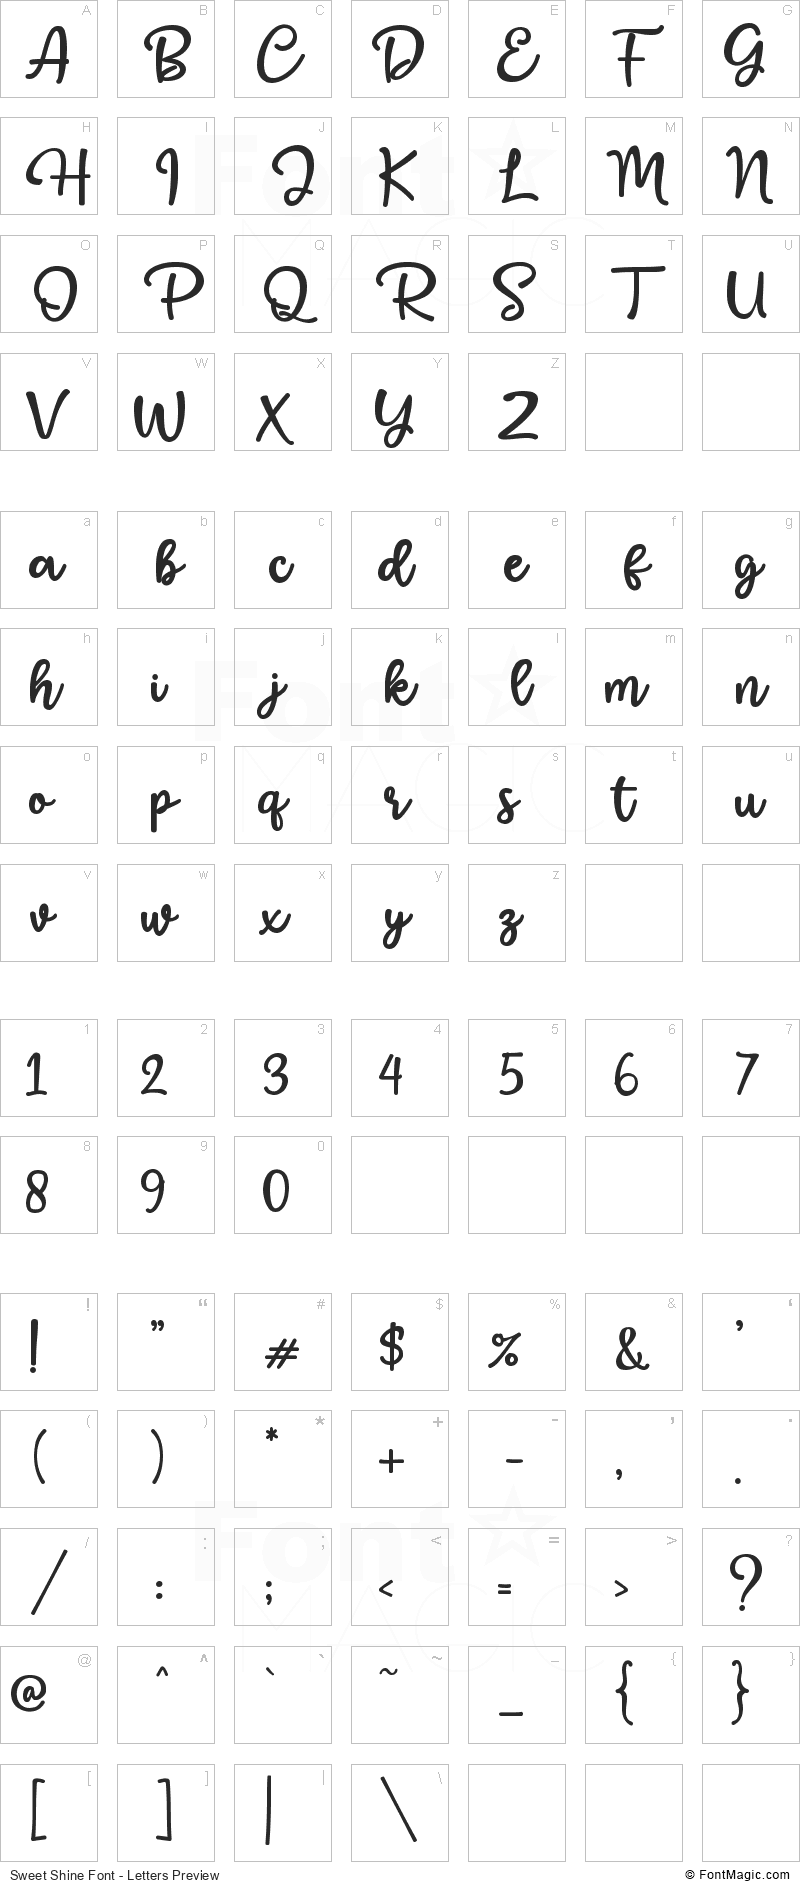 Sweet Shine Font - All Latters Preview Chart